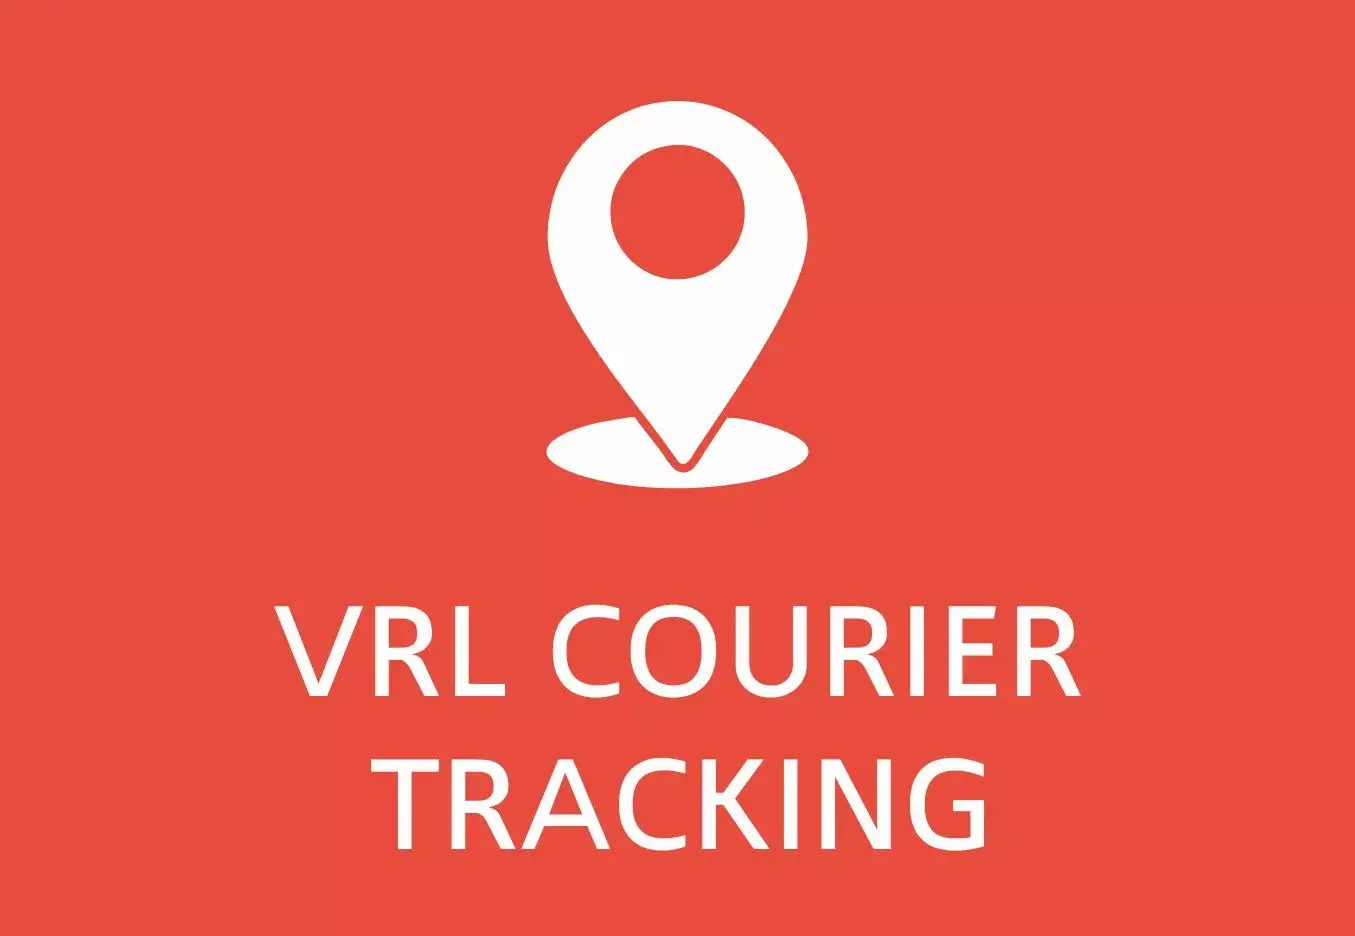 VRL COURIER TRACKING